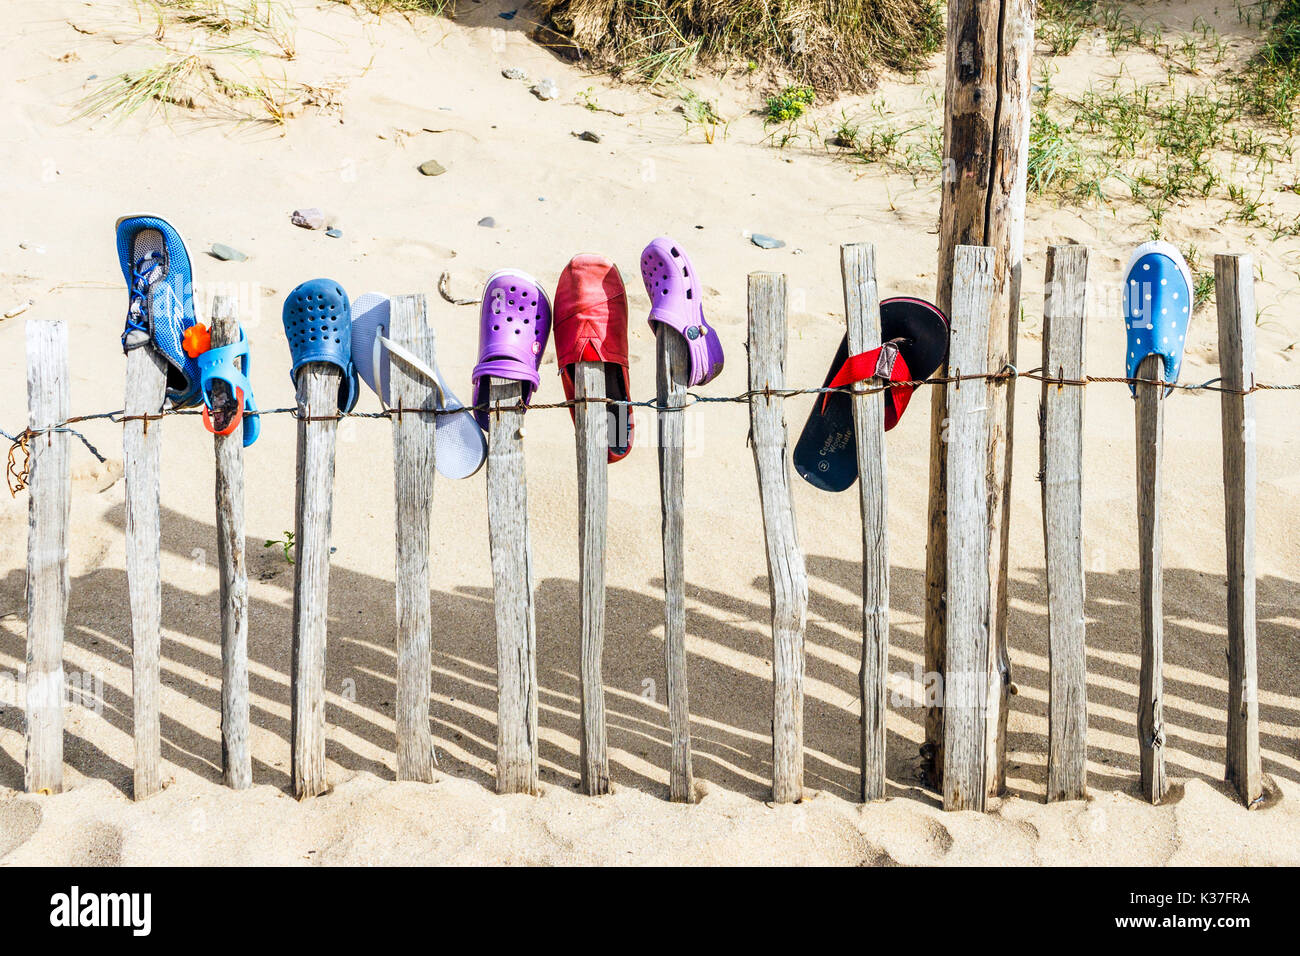 Lost shoes placed on a wooden paling fence on a sandy beach at Croyde, Devon, England, UK Stock Photo